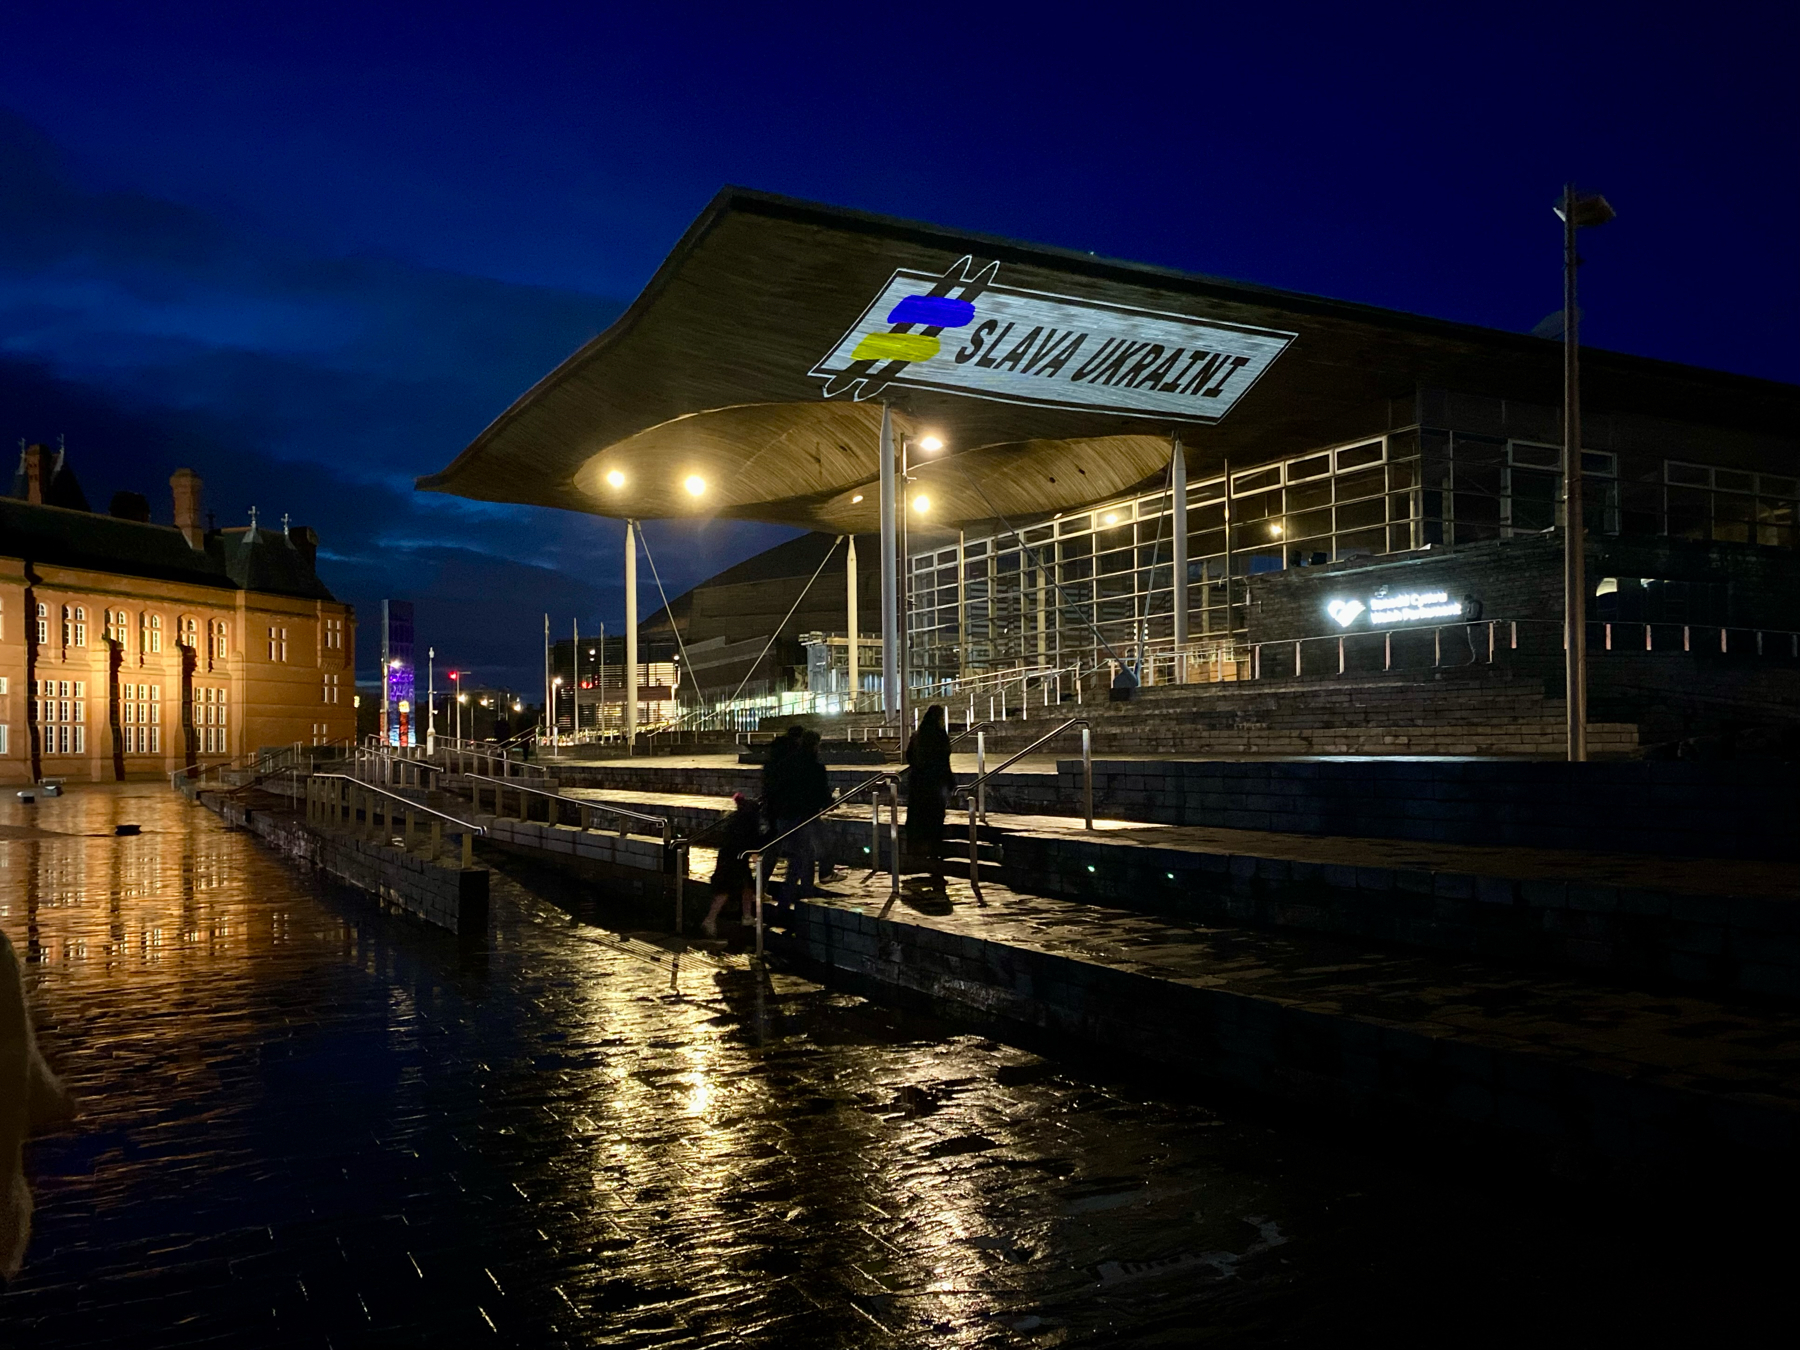 Night scene of the exterior of the Senedd, also known as the Welsh Parliament building, in Cardiff Bay with the building illuminated and a wet promenade reflecting lights. People are visible walking by.